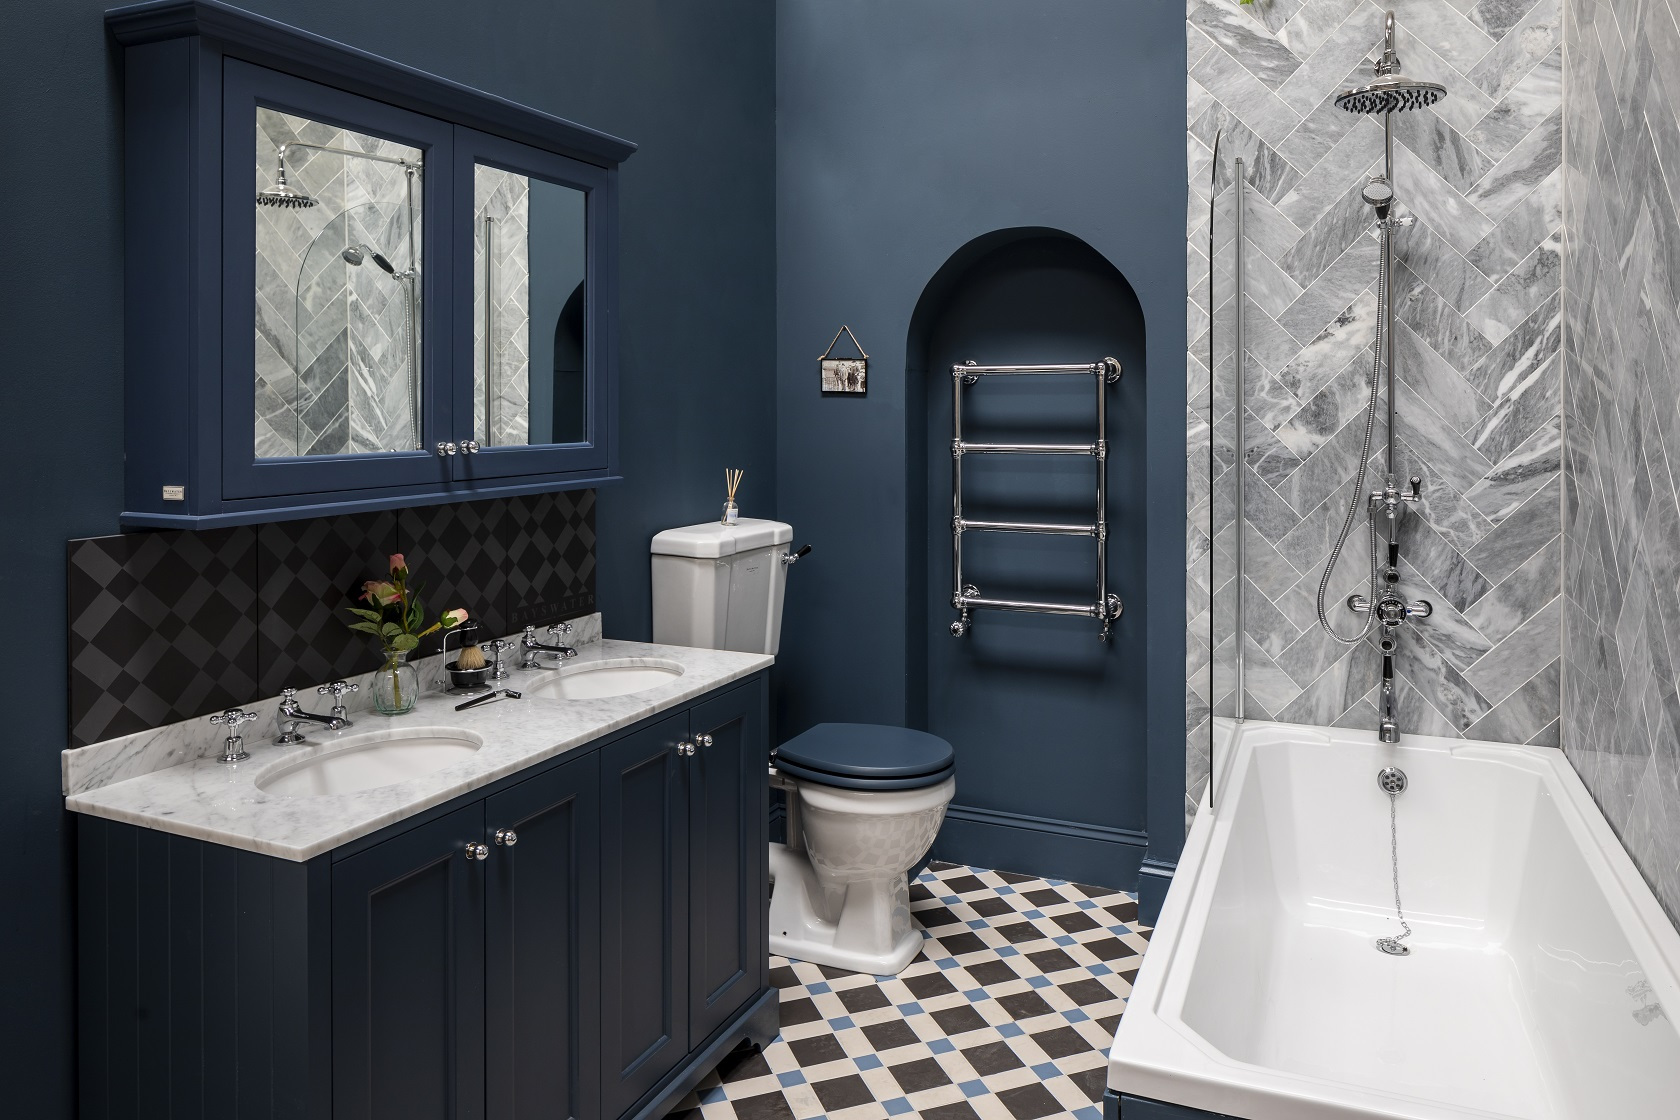 Traditional bathroom ideas – 22 timeless styles and classic decor inspiration